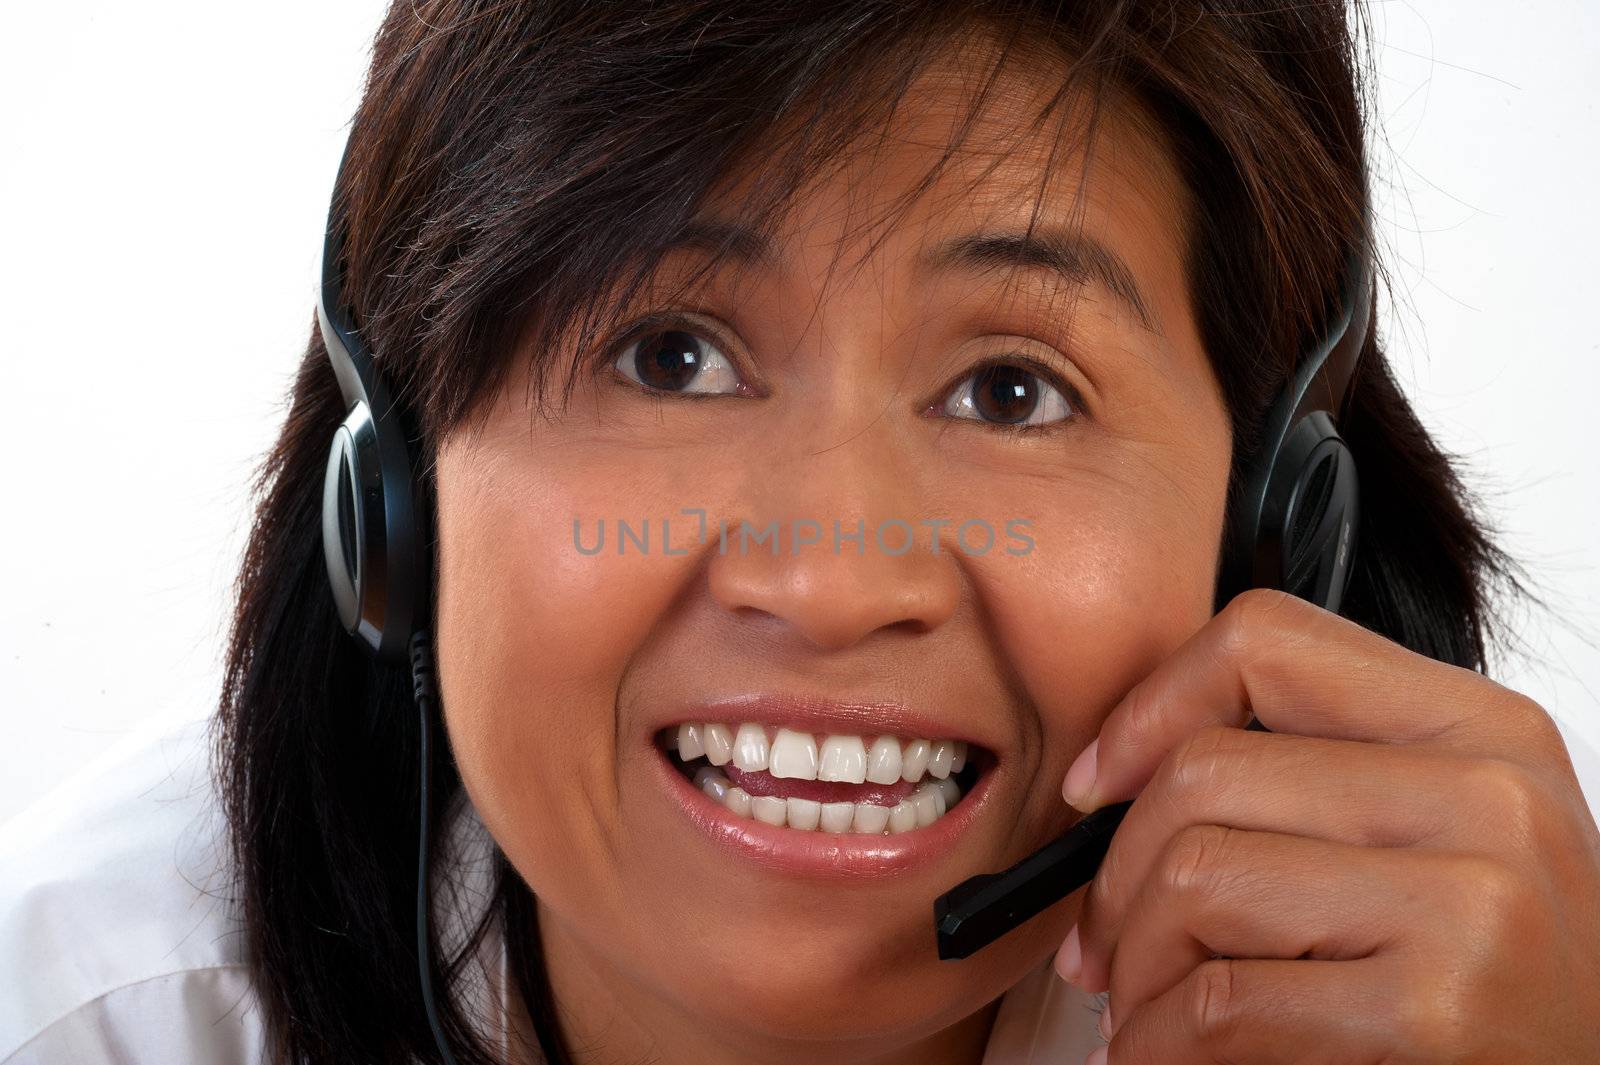 portrait of a happy smiling young Asian woman with a headset